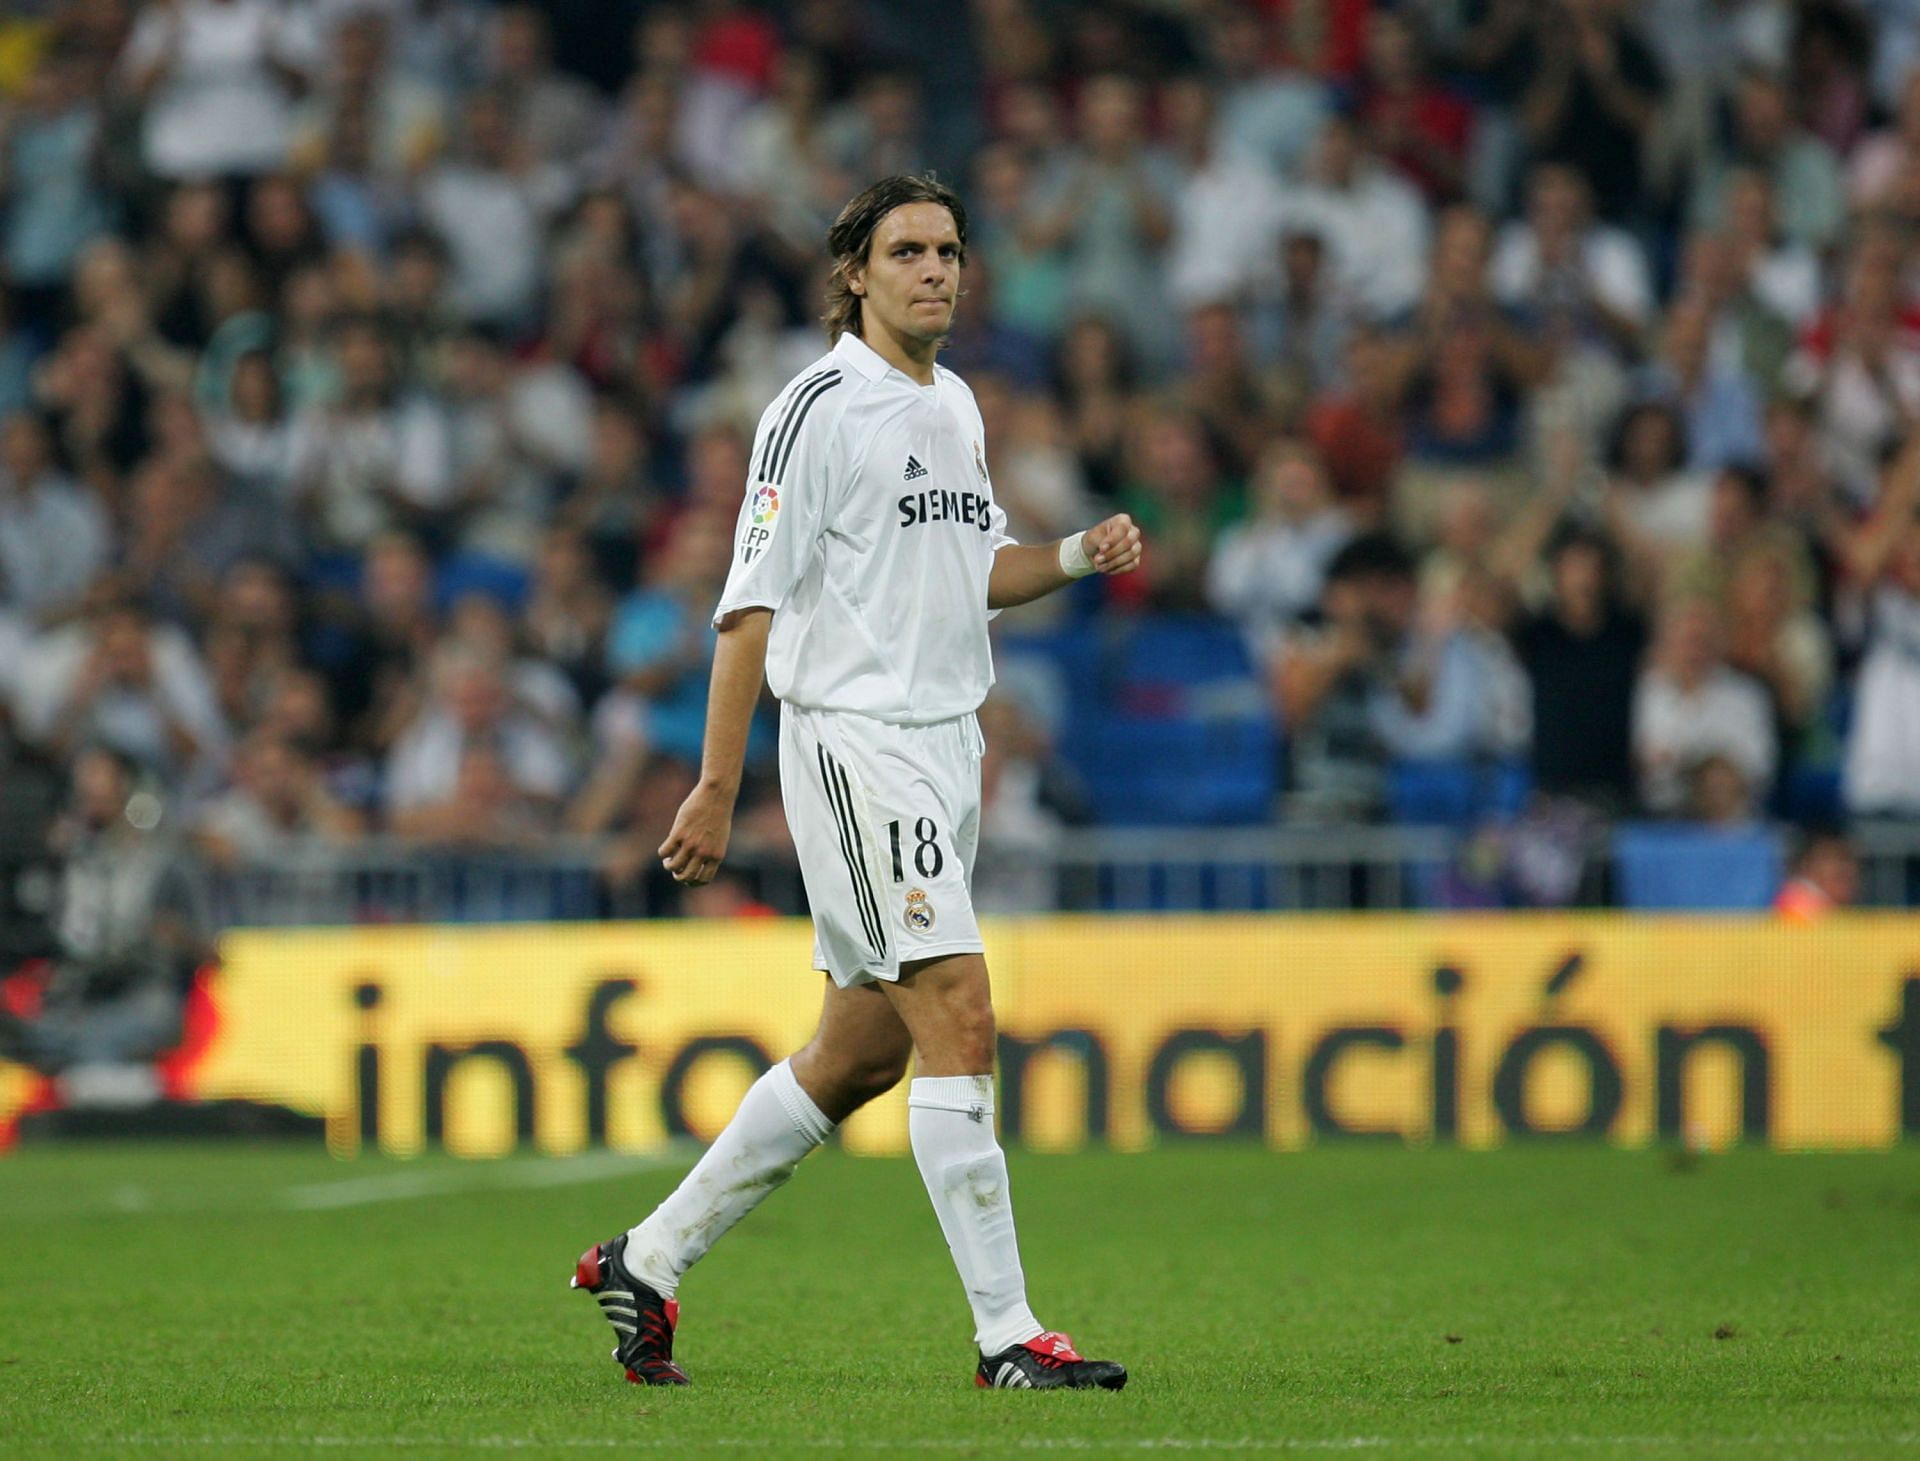 Jonathan Woodgate being sent off - Real Madrid v Athletic Bilbao